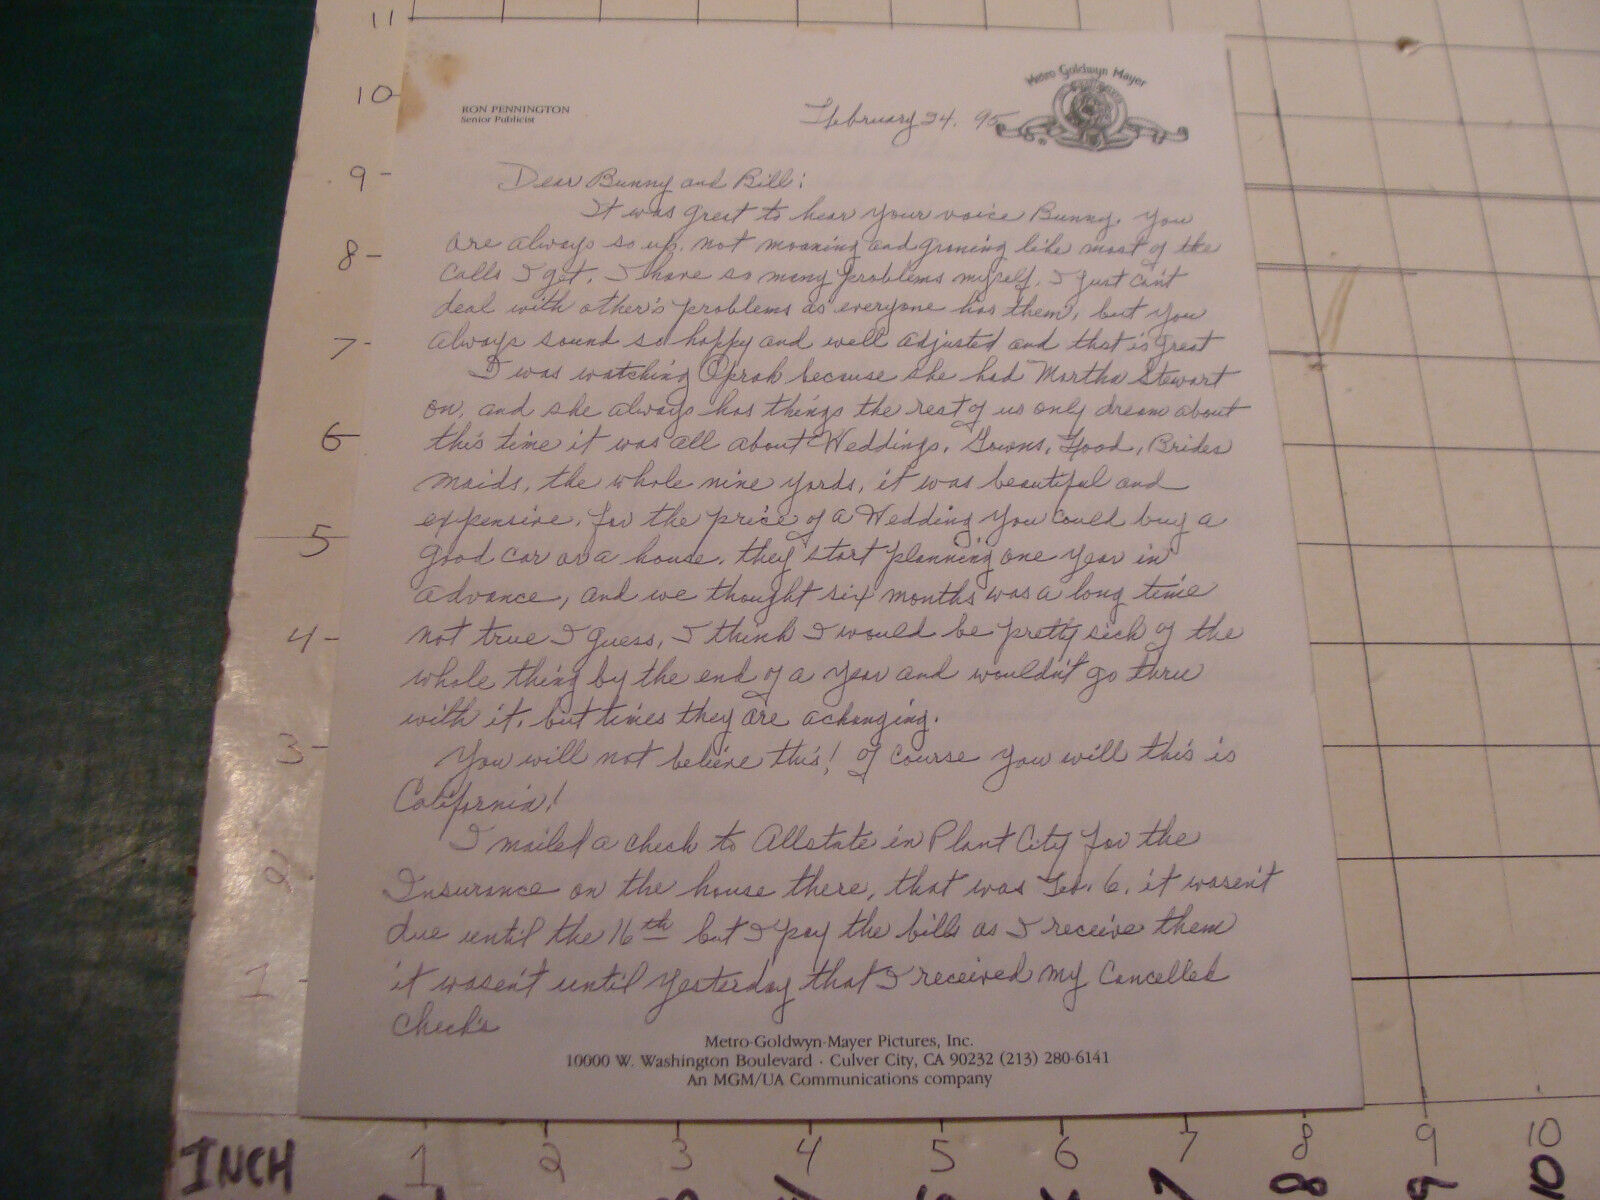 Letter original, 1995 on MGM stationary, 3 page